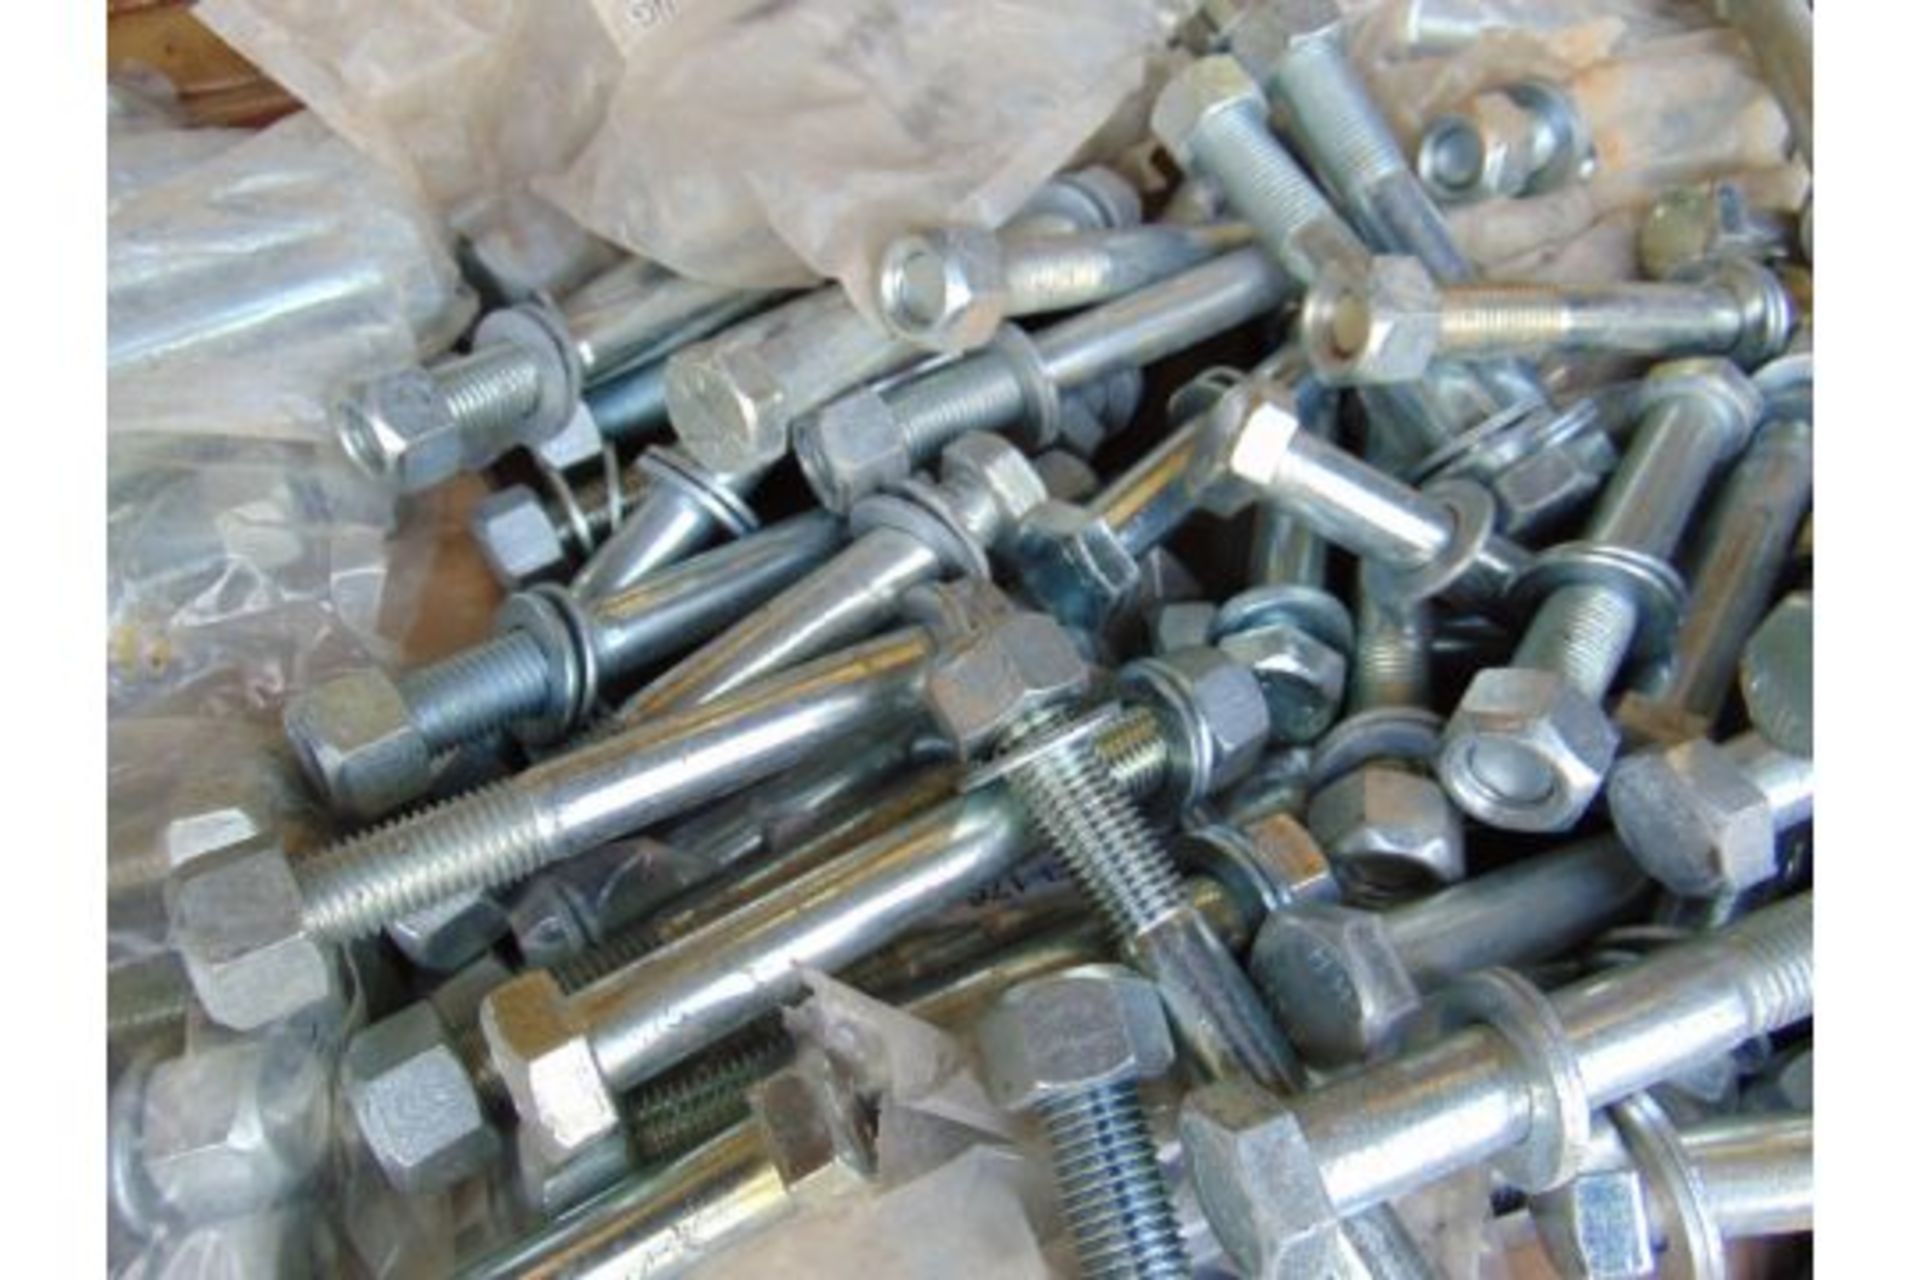 Approx. 250 M20 x 150 Grade 8.8 Bolts, Washers & Nuts - Image 3 of 3